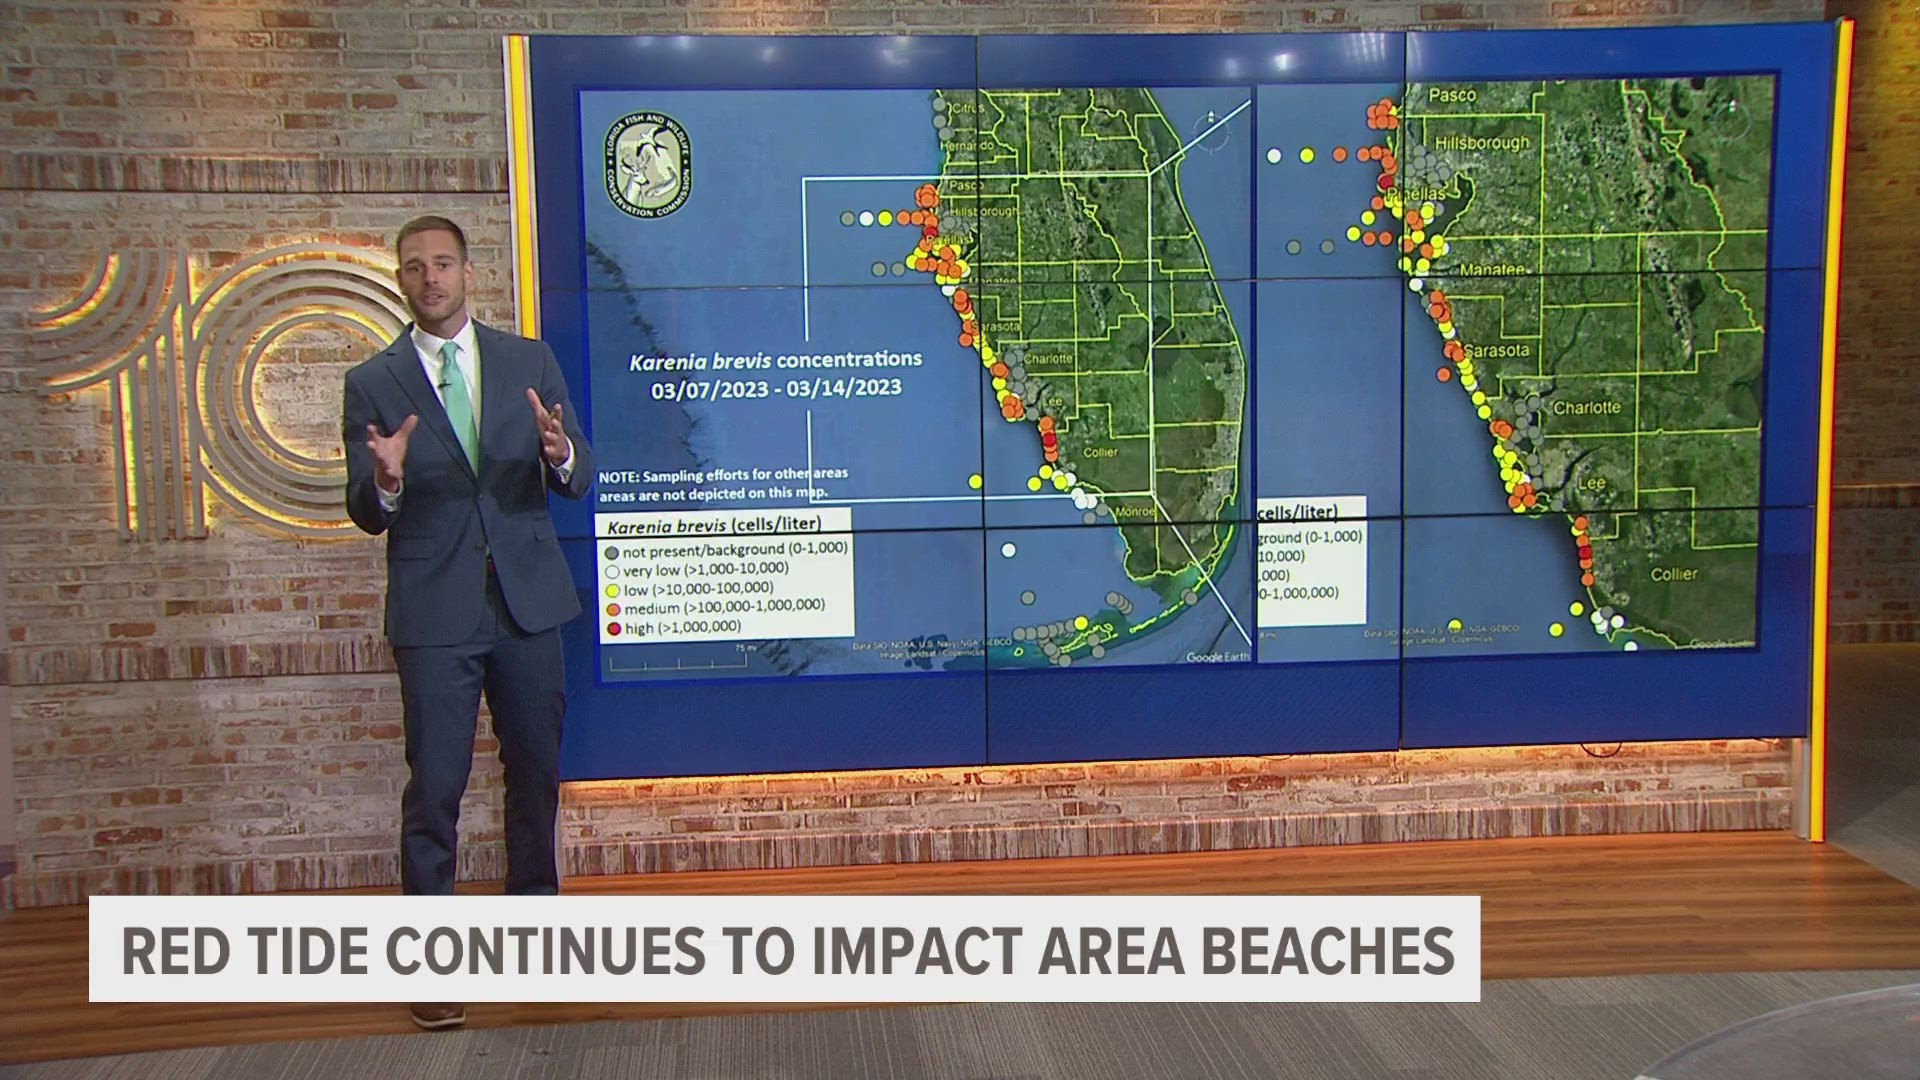 There are still medium to low concentrations of red tide at beaches across the Tampa Bay area.